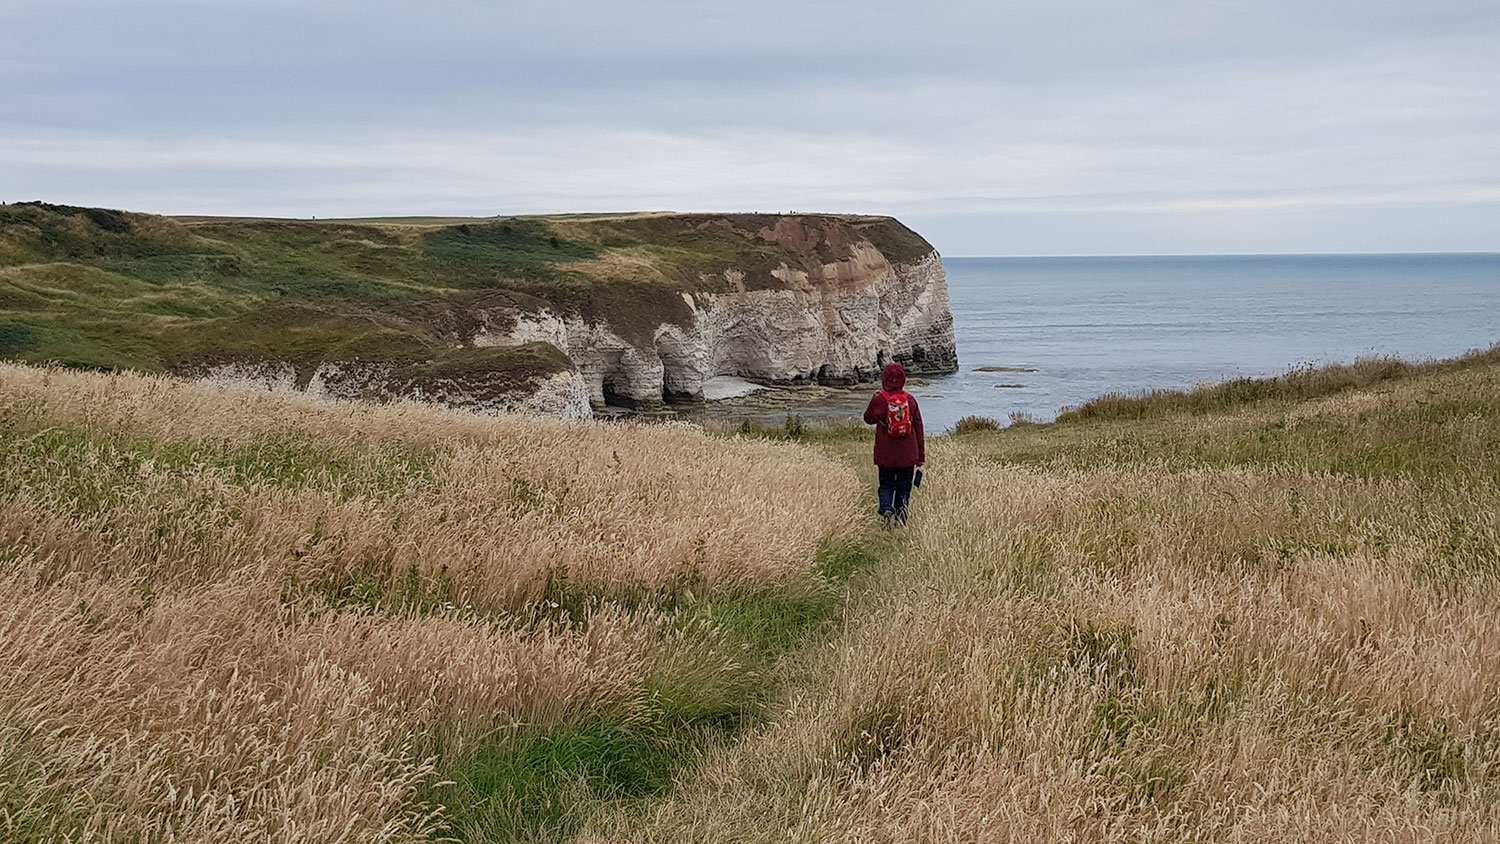 A view out to sea from the cliffs at Flamborough Head. A person is seen from the back as she walks along a track through long, dry grasses towards the edge of the cliff. 